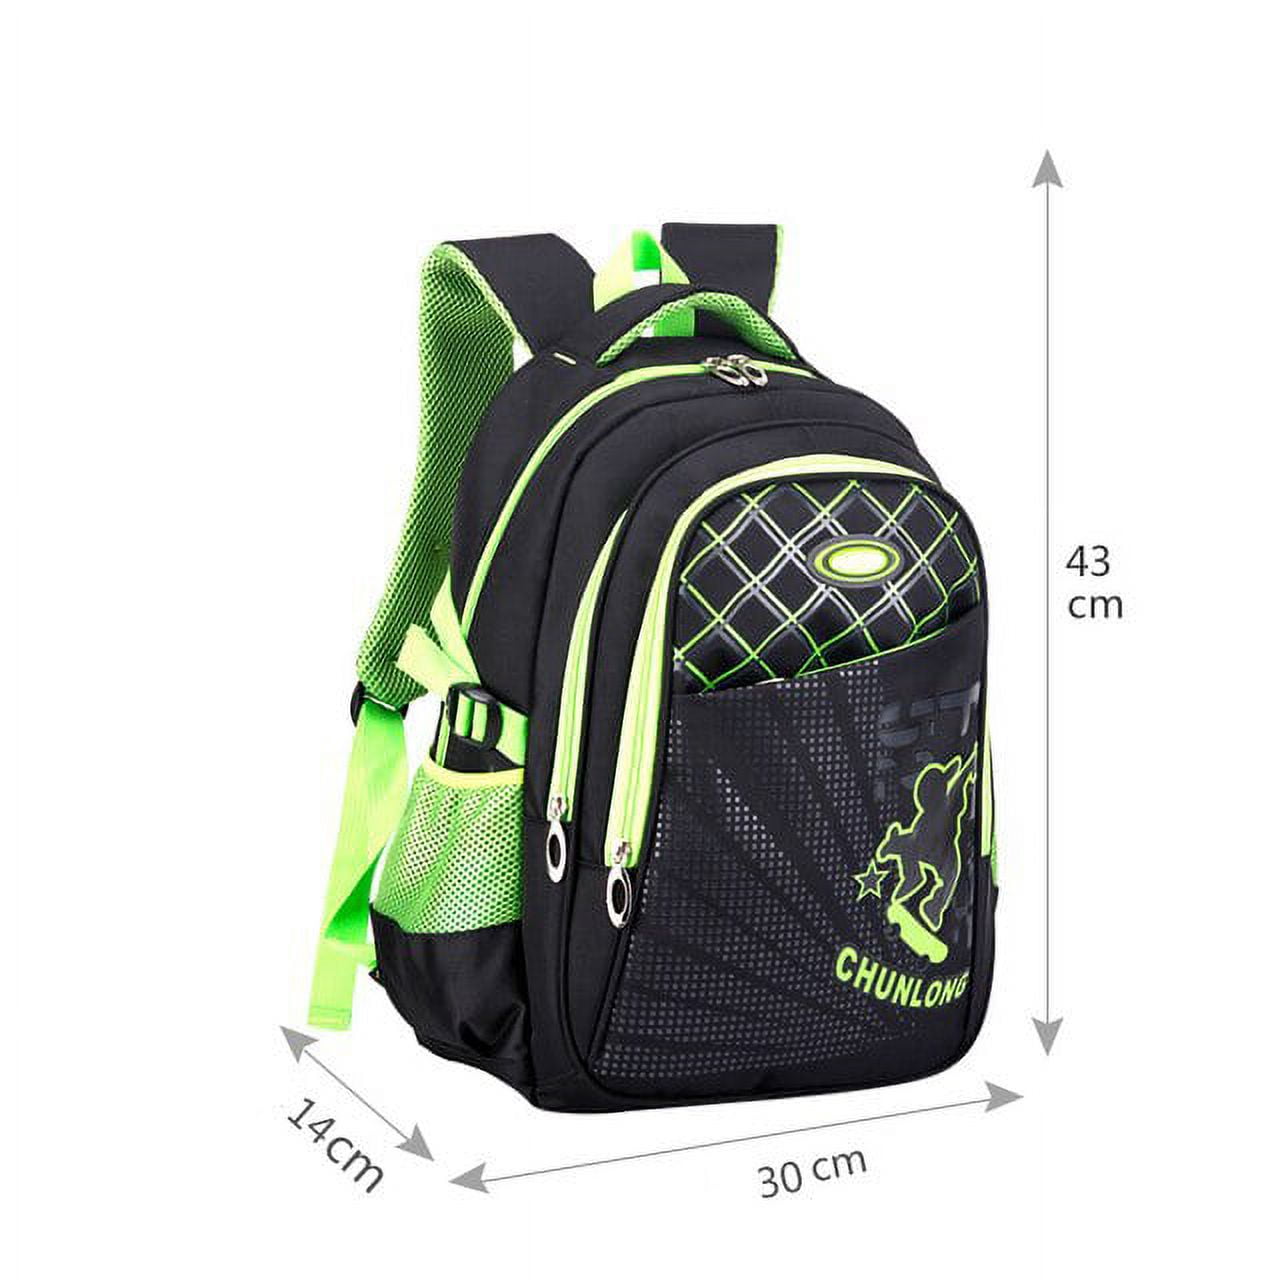 Source custom new design wholesale latest school bags for girls school book bag  backpack on m.